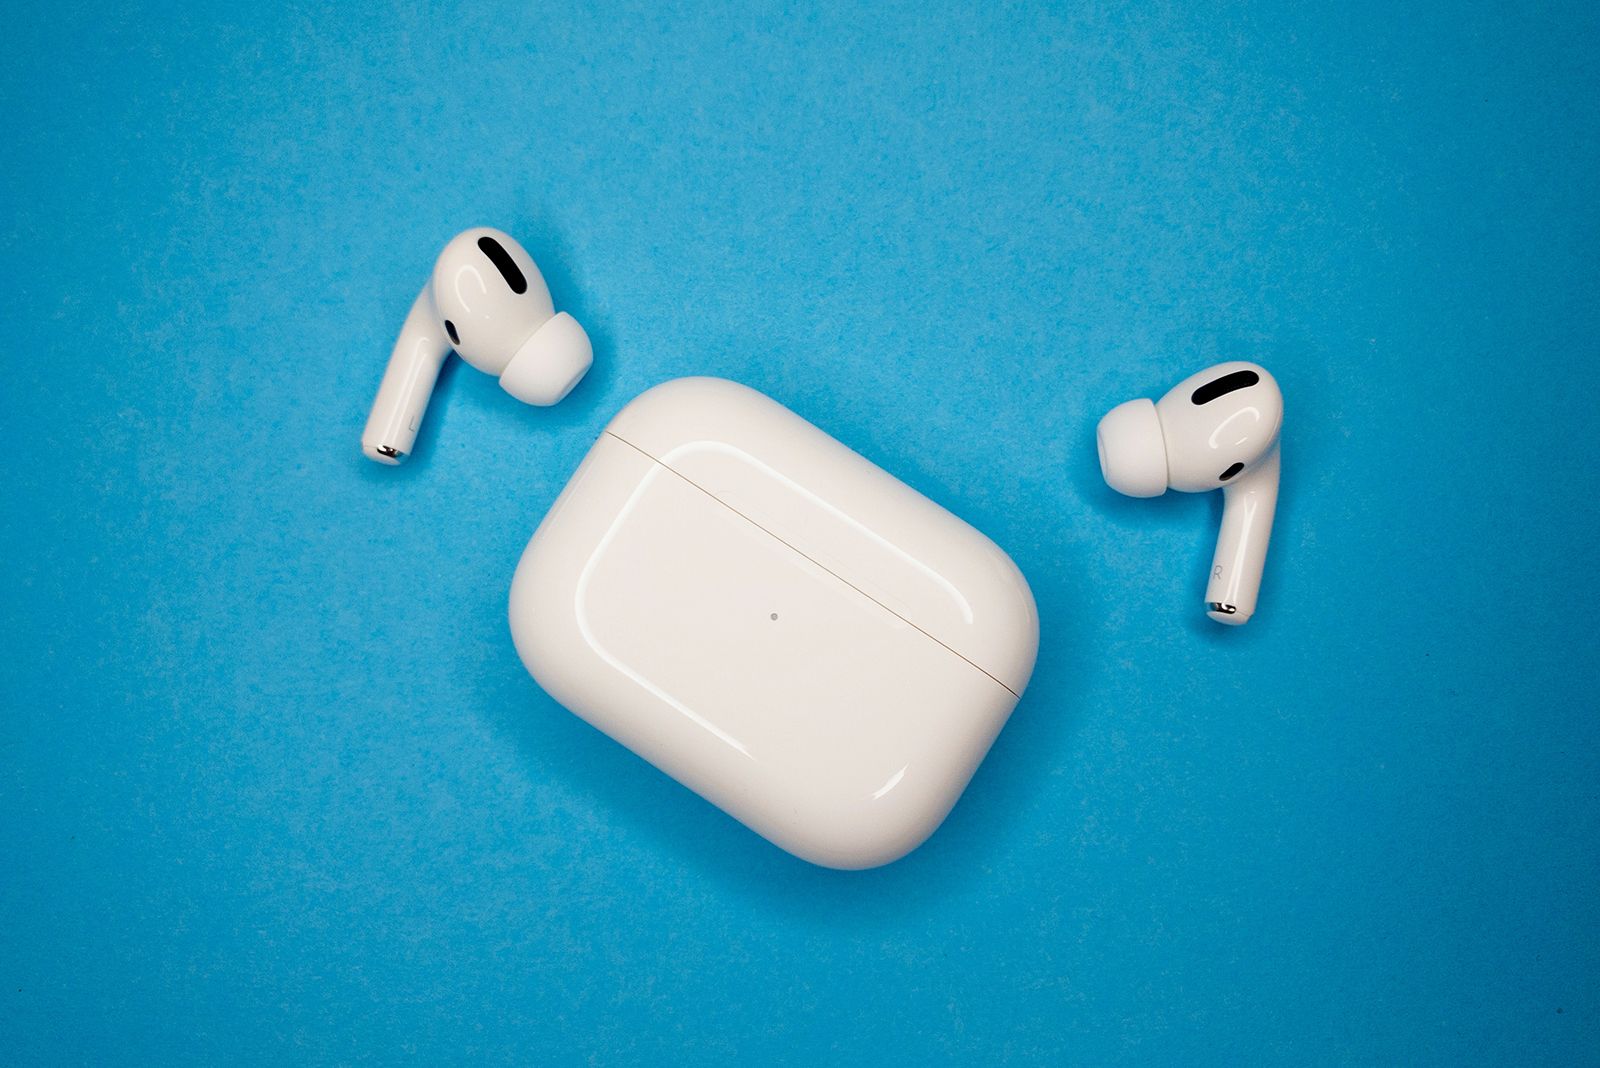 Apple's 2022 AirPods Pro refresh will sport fitness-tracking motion sensors photo 1